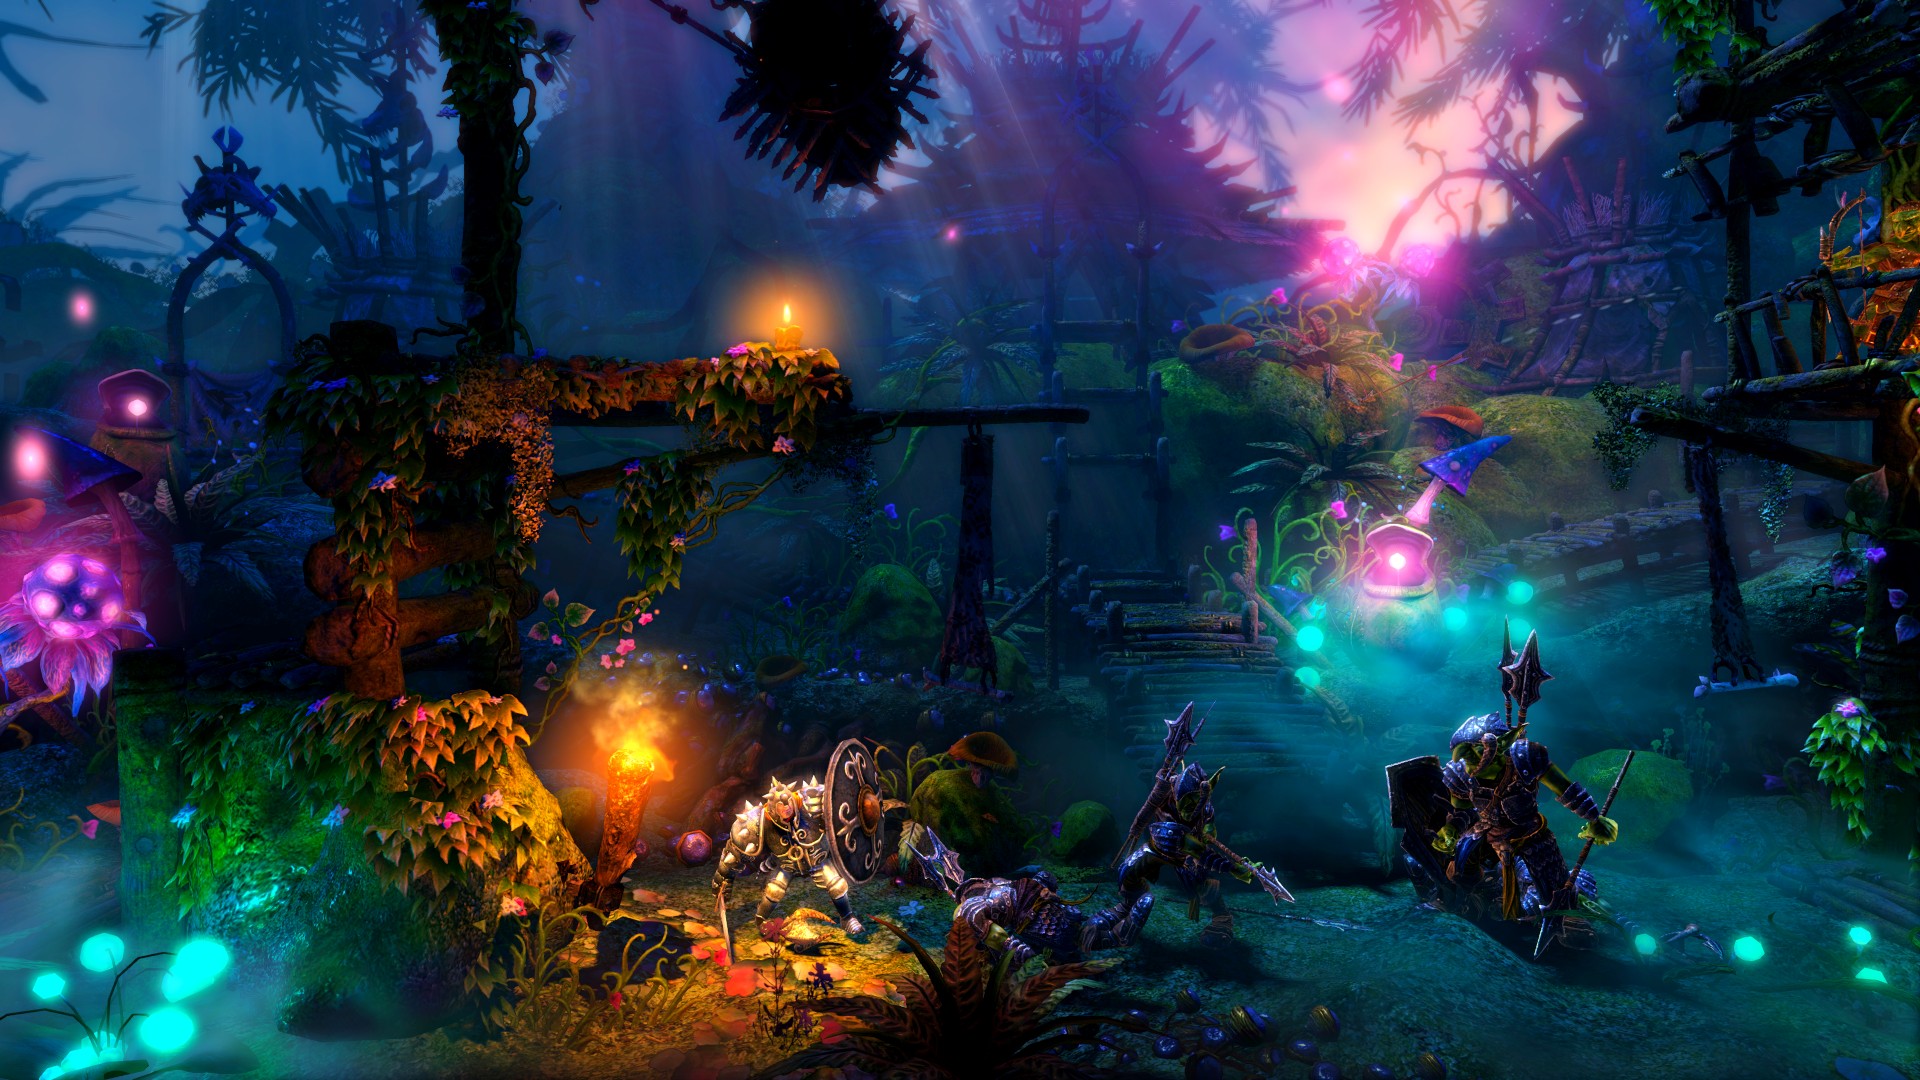 Trine Wallpapers